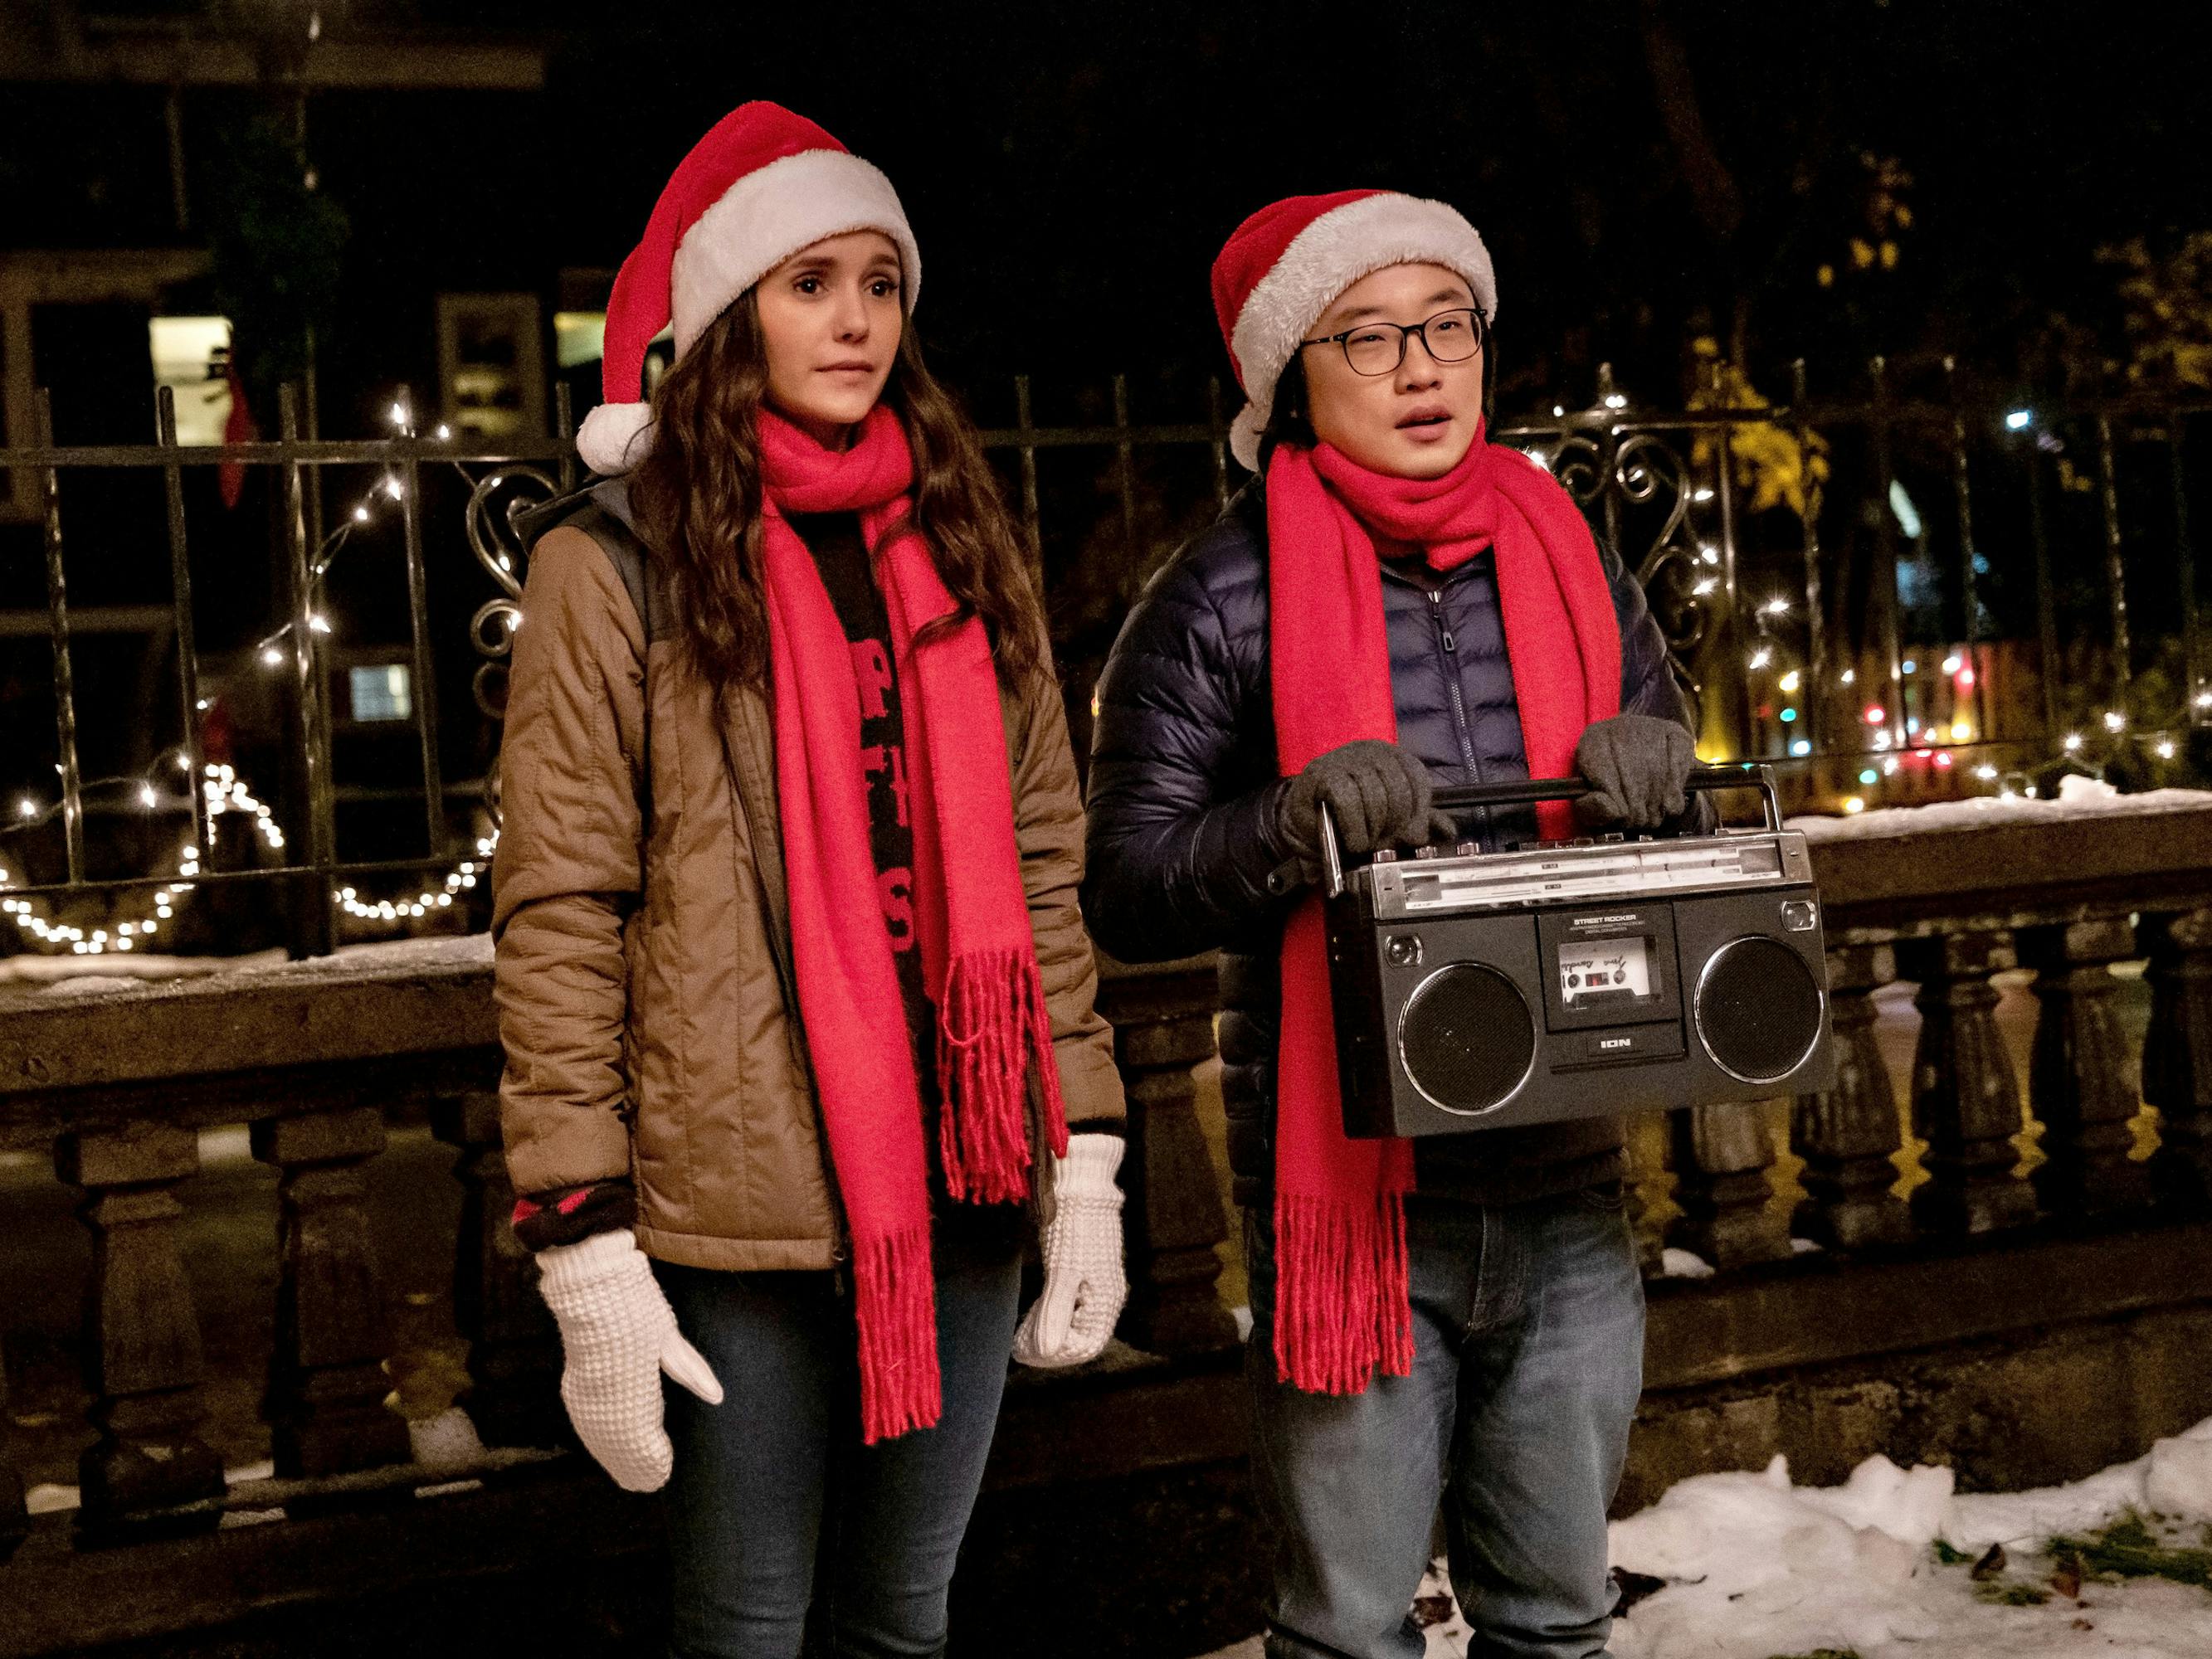 Natalie Bauer (Nina Dobrev) and Josh Lin (Jimmy O. Yang) sit together with a stereo, wearing red scarves and santa hats.